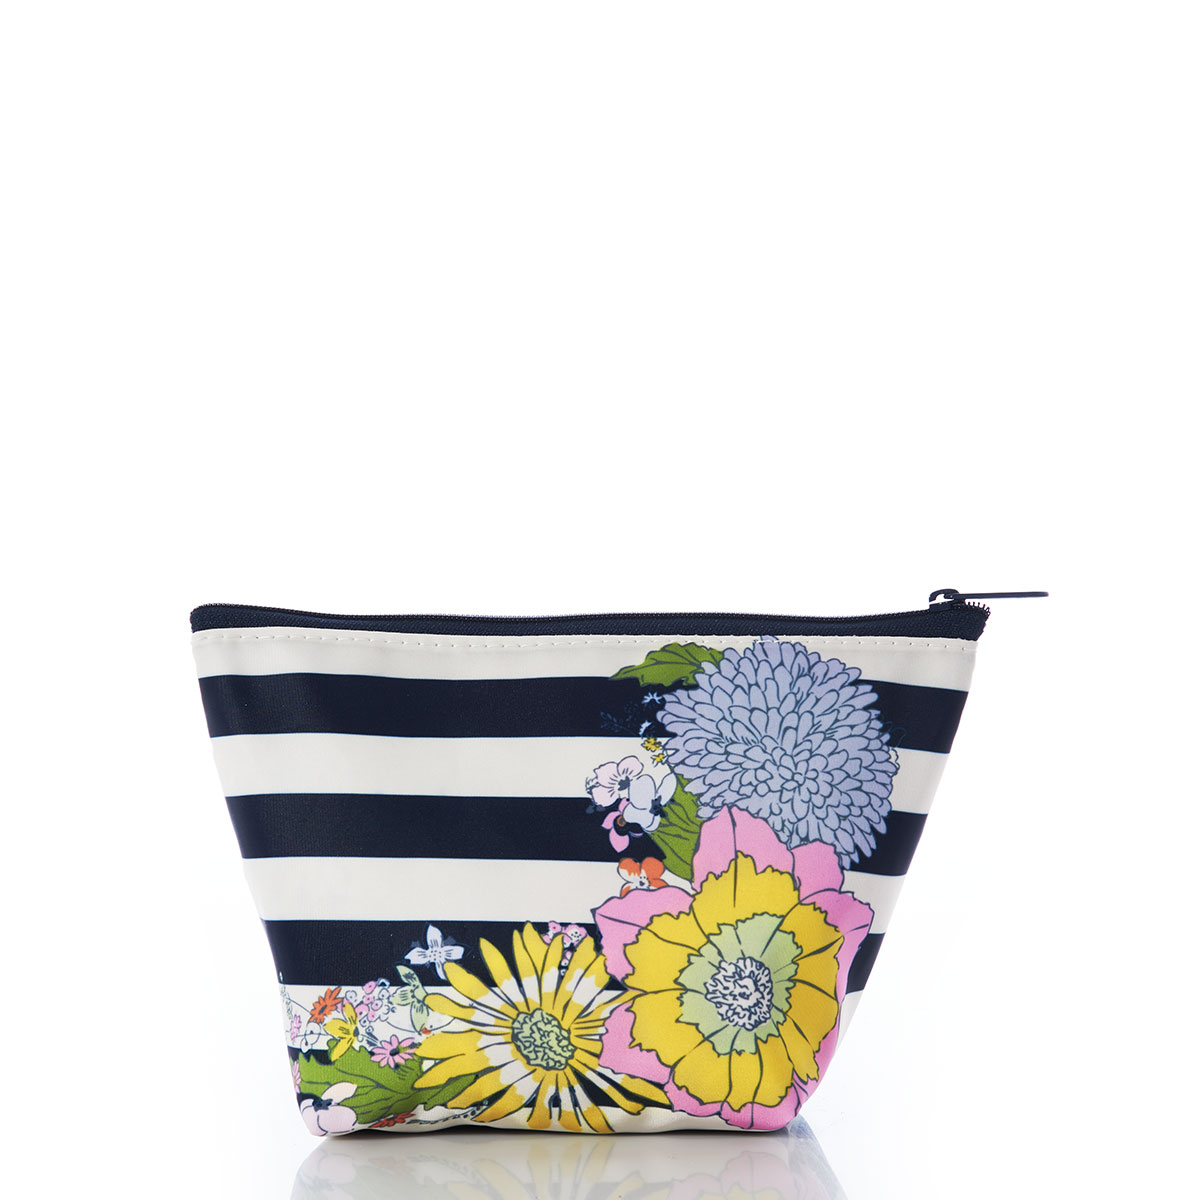 bold navy and white stripes recycled sail cloth cosmetic pouch embellished with flowers in the bottom right corner